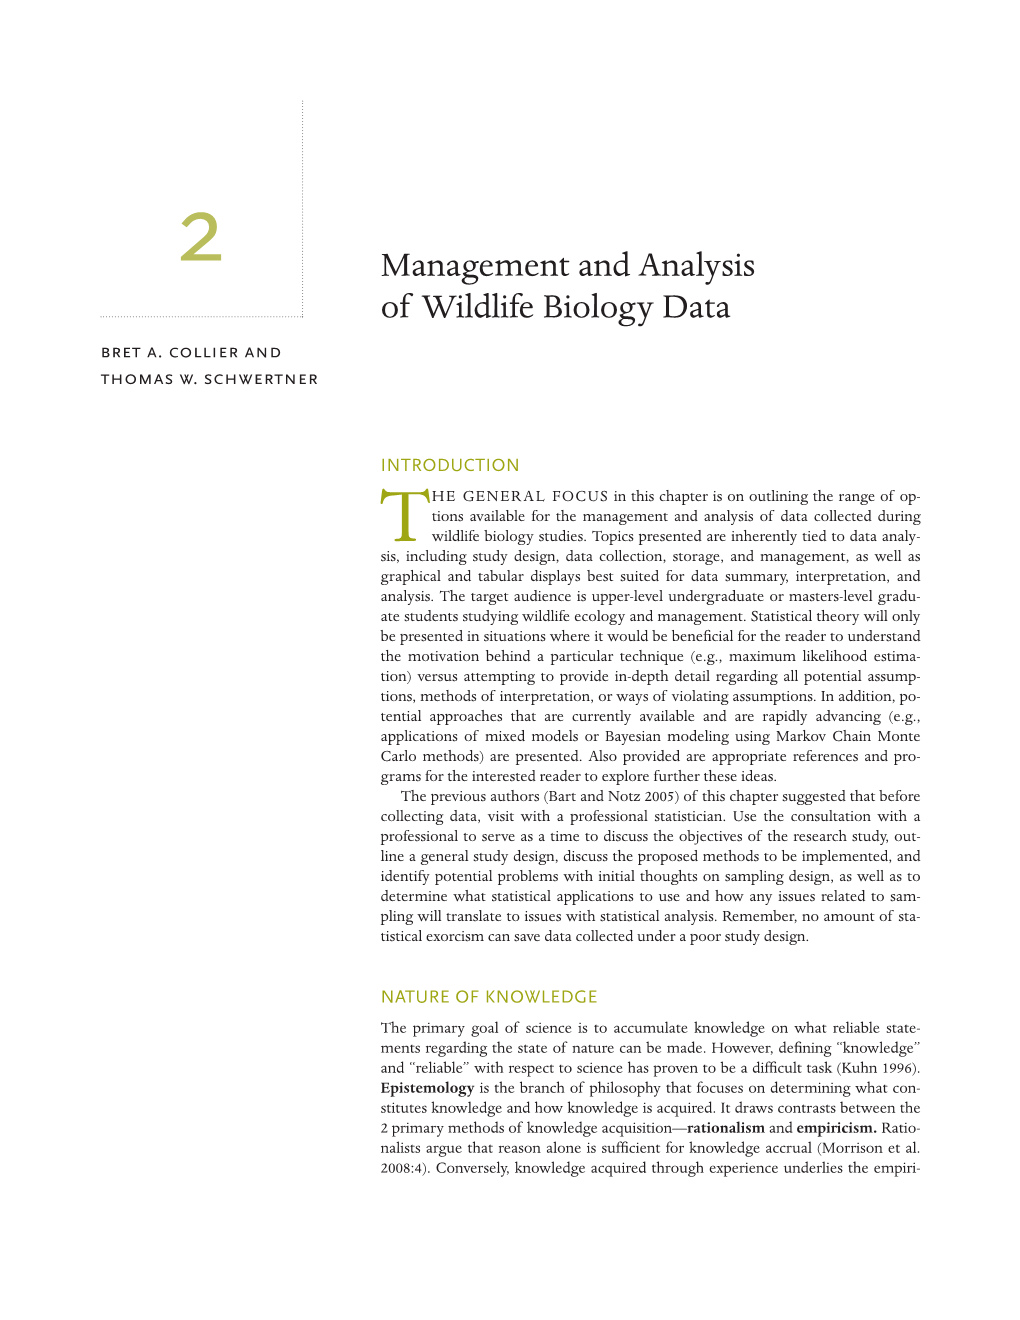 Management and Analysis of Wildlife Biology Data Bret A